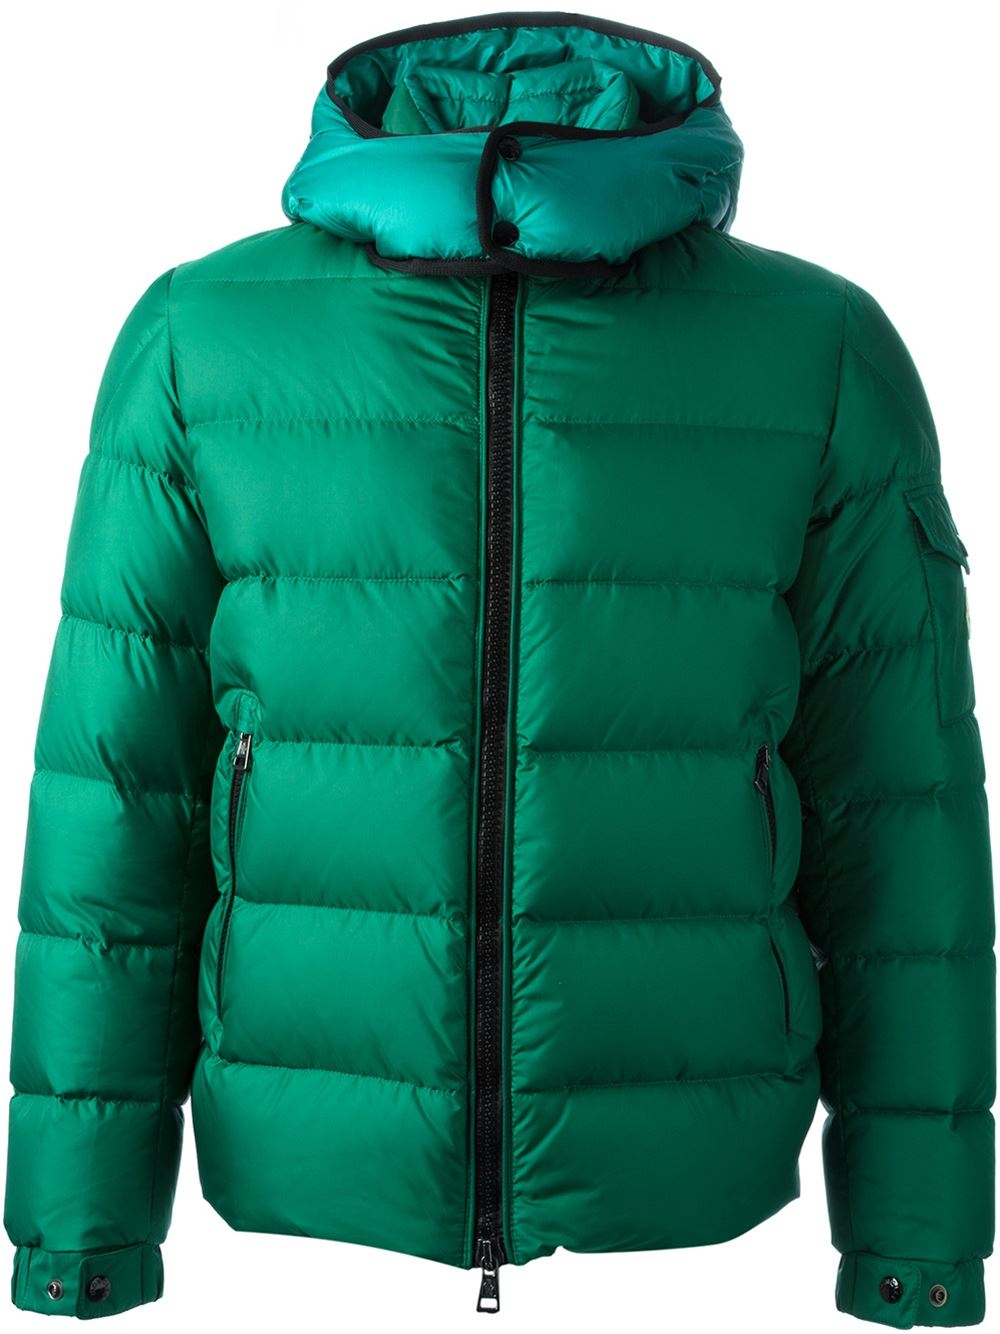 Moncler 'Hymalay' Padded Jacket in Green for Men - Lyst